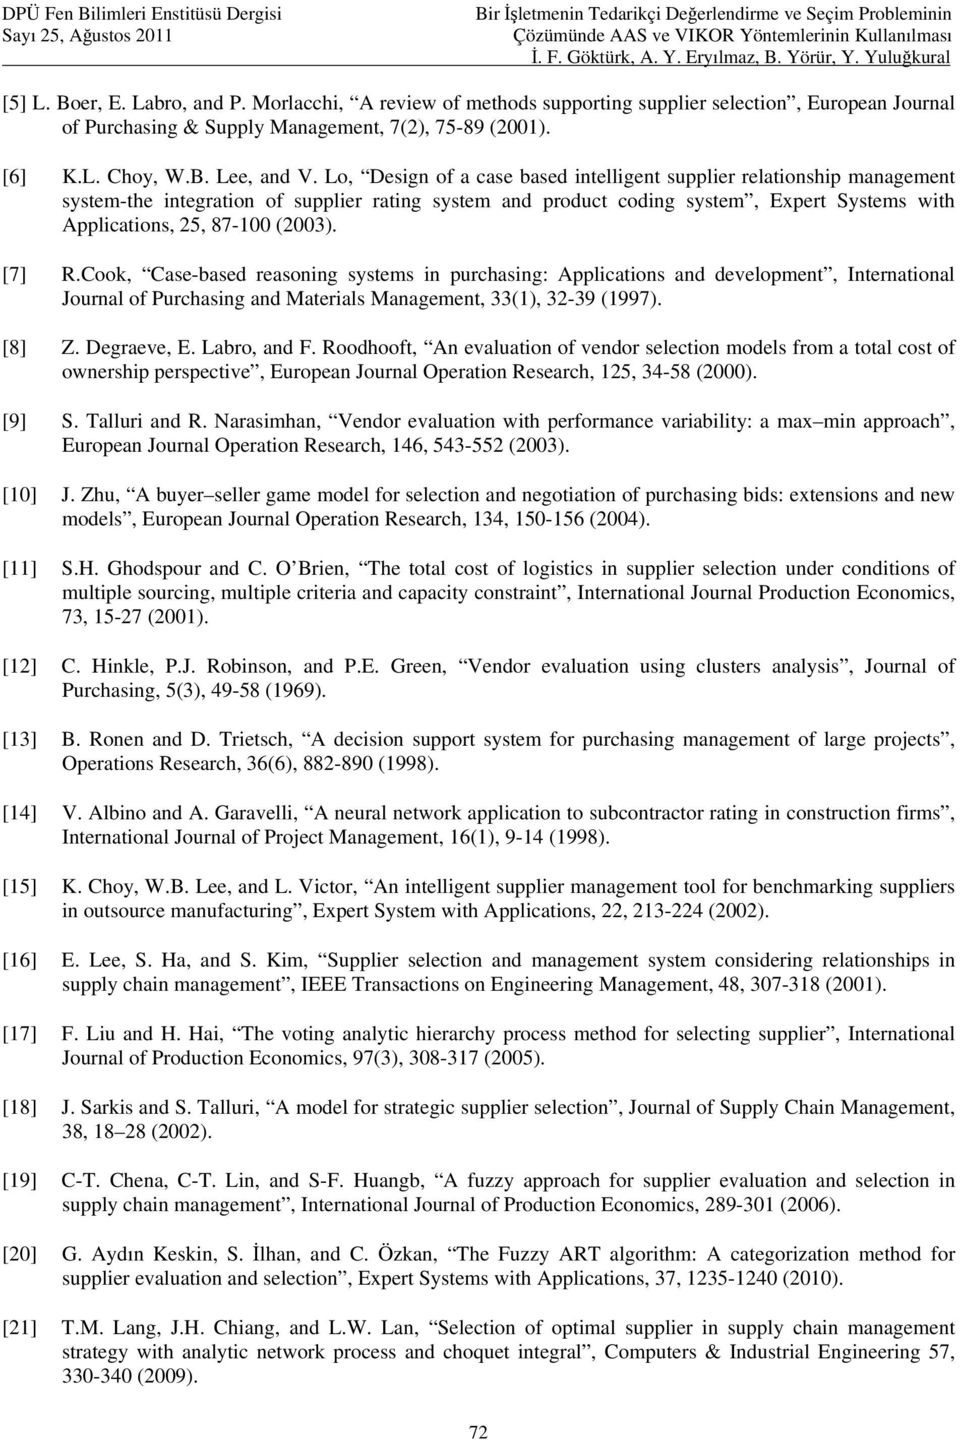 supplier rating system and product coding system, Expert Systems with Applications, 25, 87-100 (2003) [7] RCoo, Case-based reasoning systems in purchasing: Applications and development, International